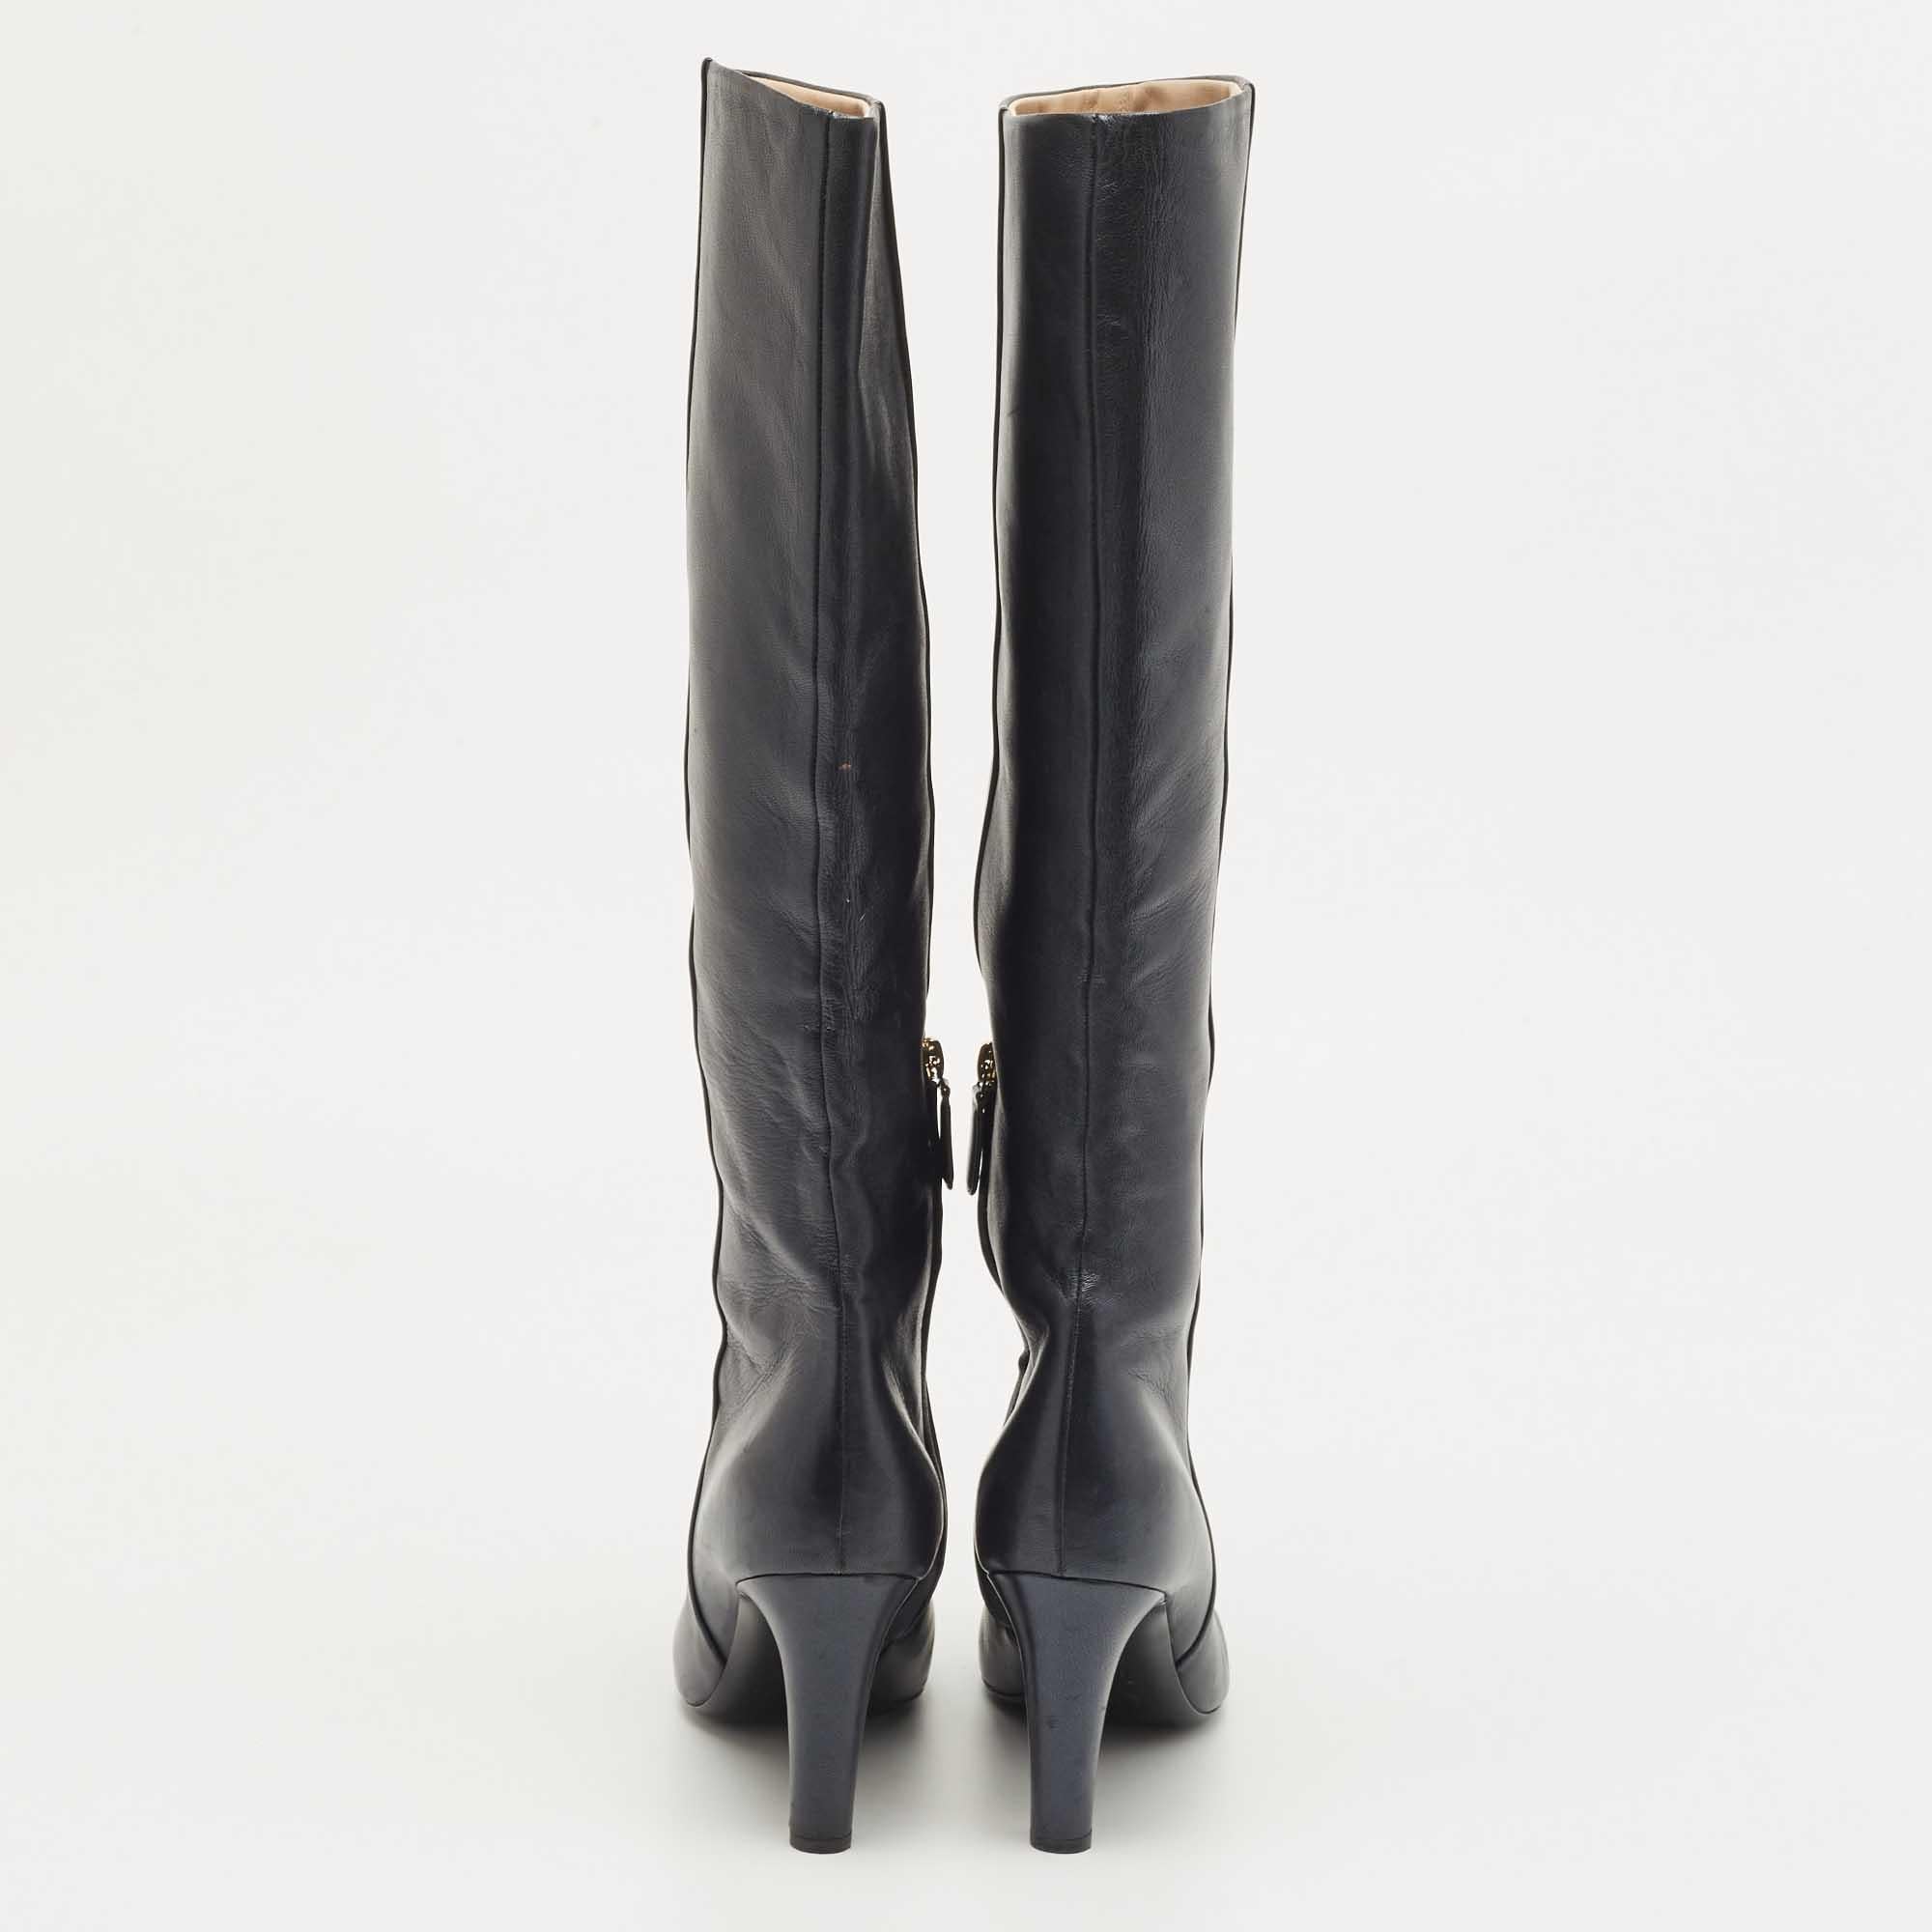 Chanel Navy Blue Leather Cap Toe Knee Length Boots Size 38.5 In Good Condition For Sale In Dubai, Al Qouz 2